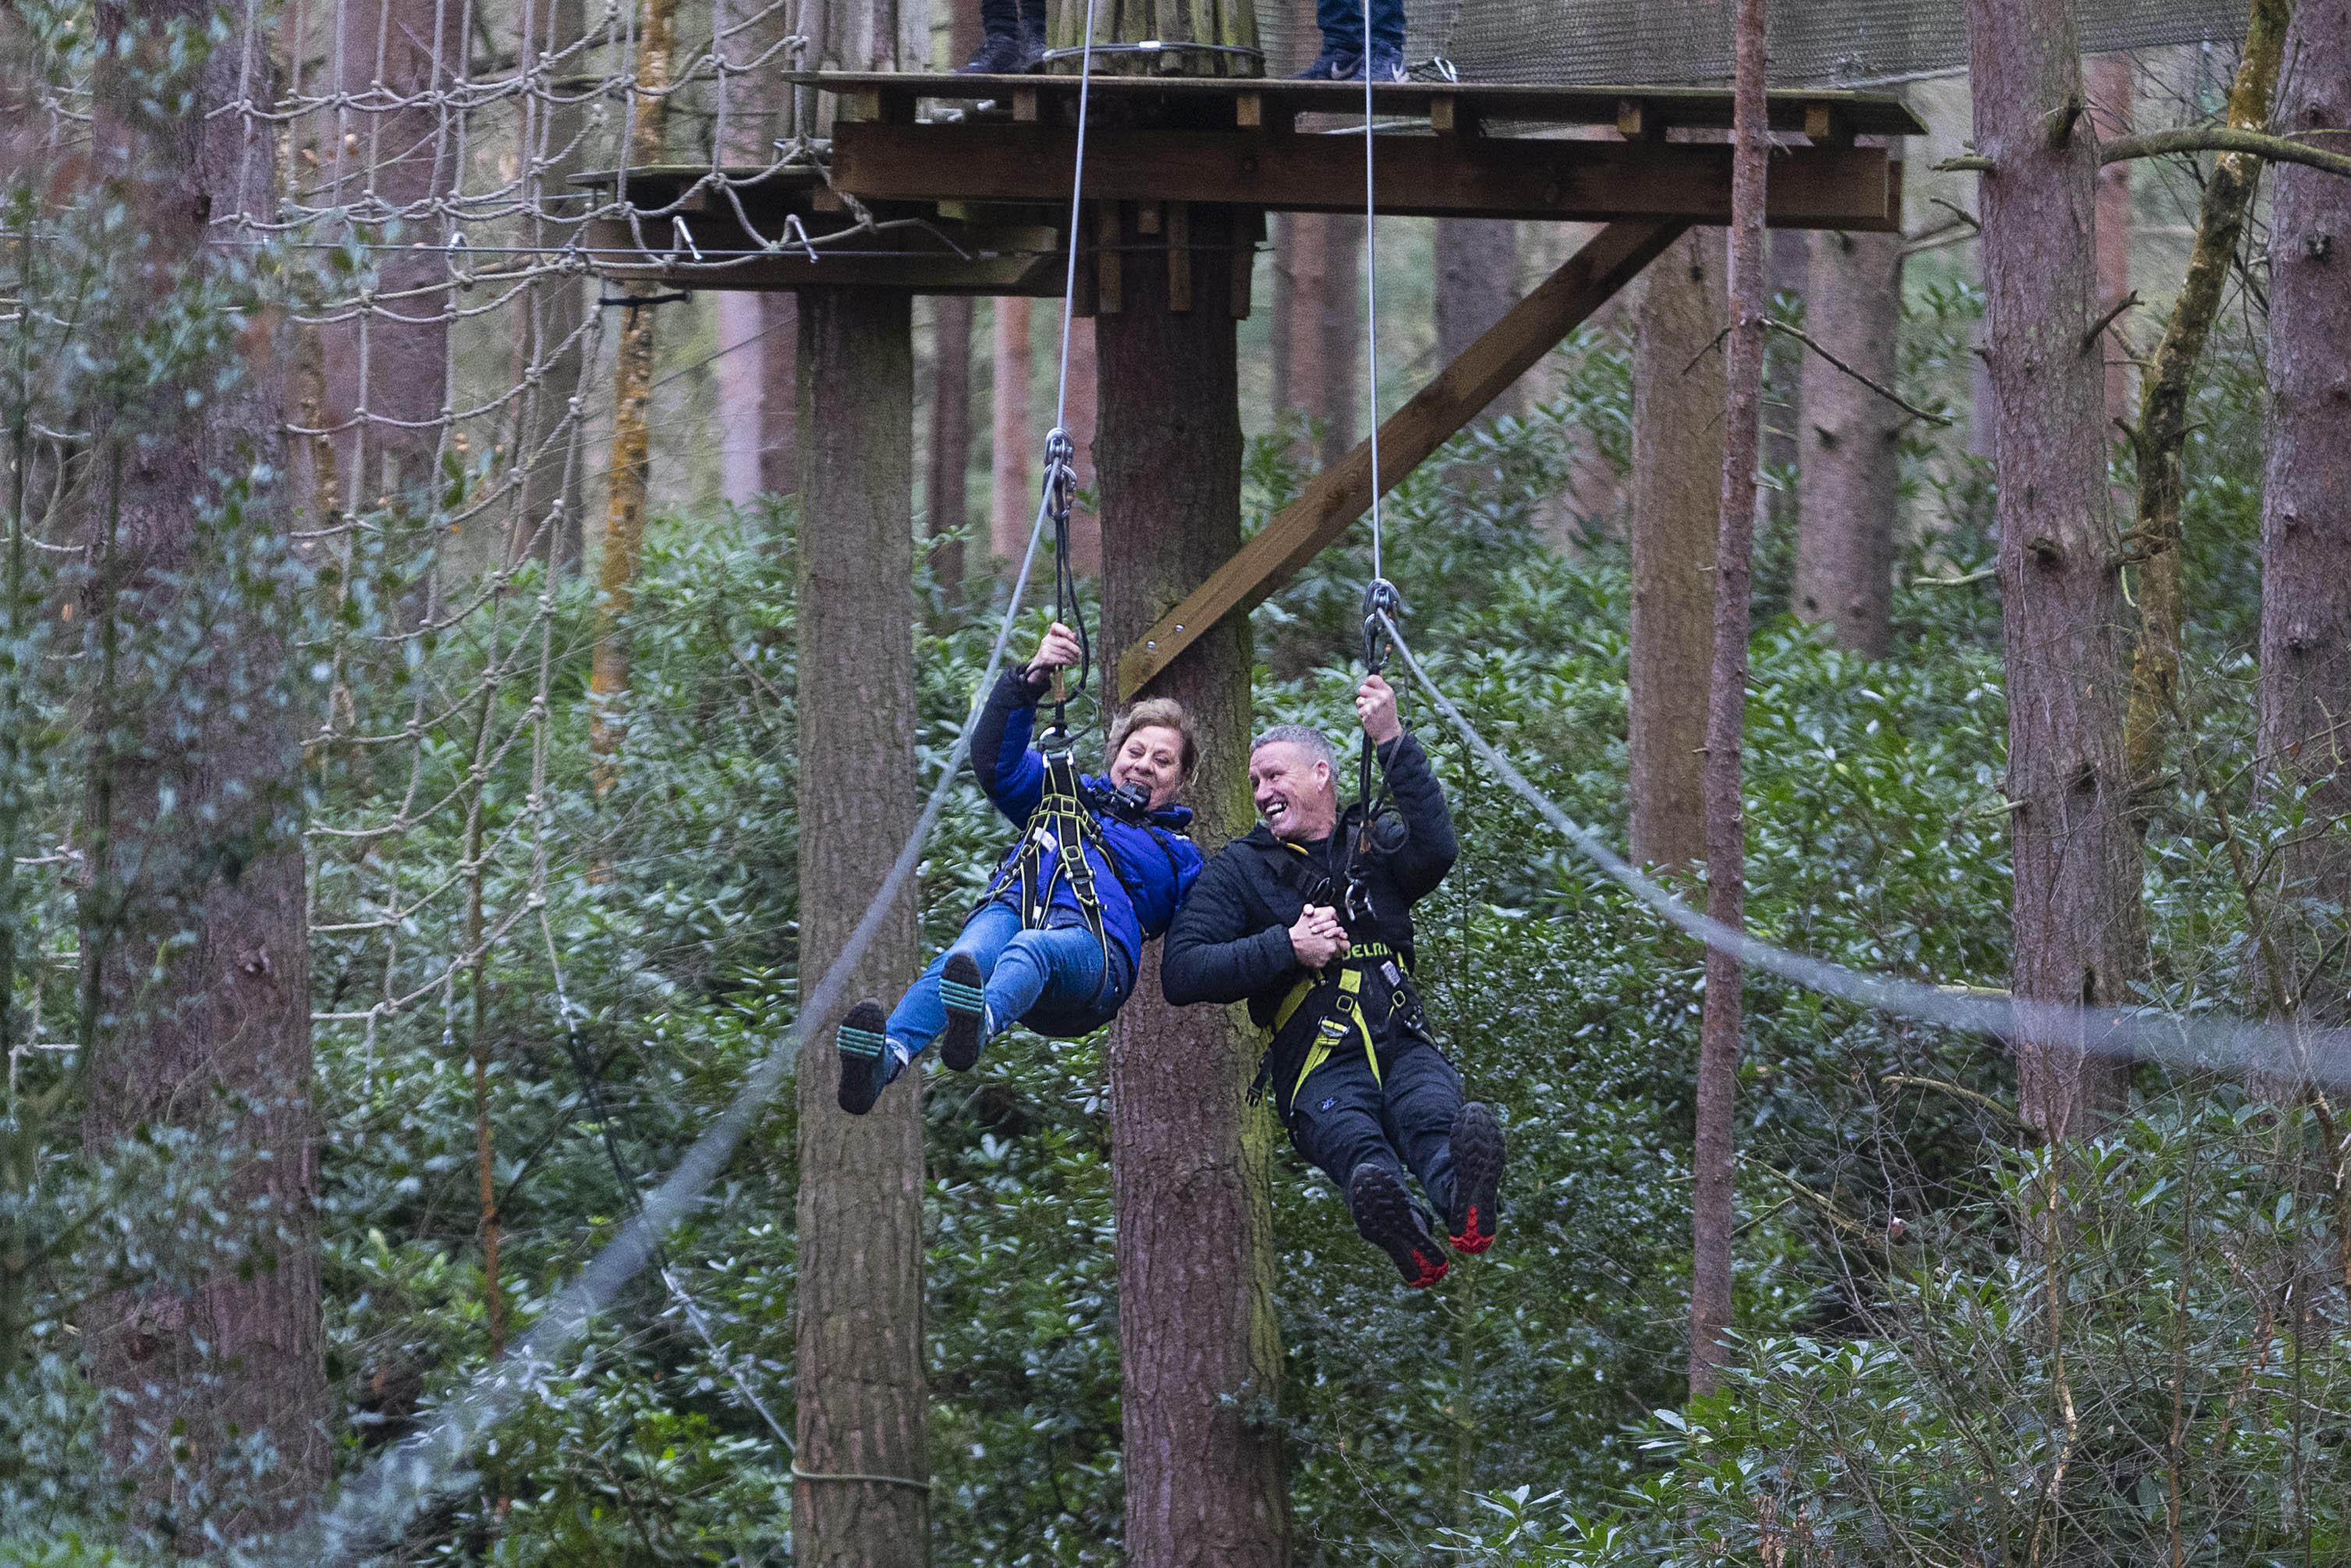 Tiggi and Billy Billingham taking part in a zip wire as they tackle the Go Ape assault course 